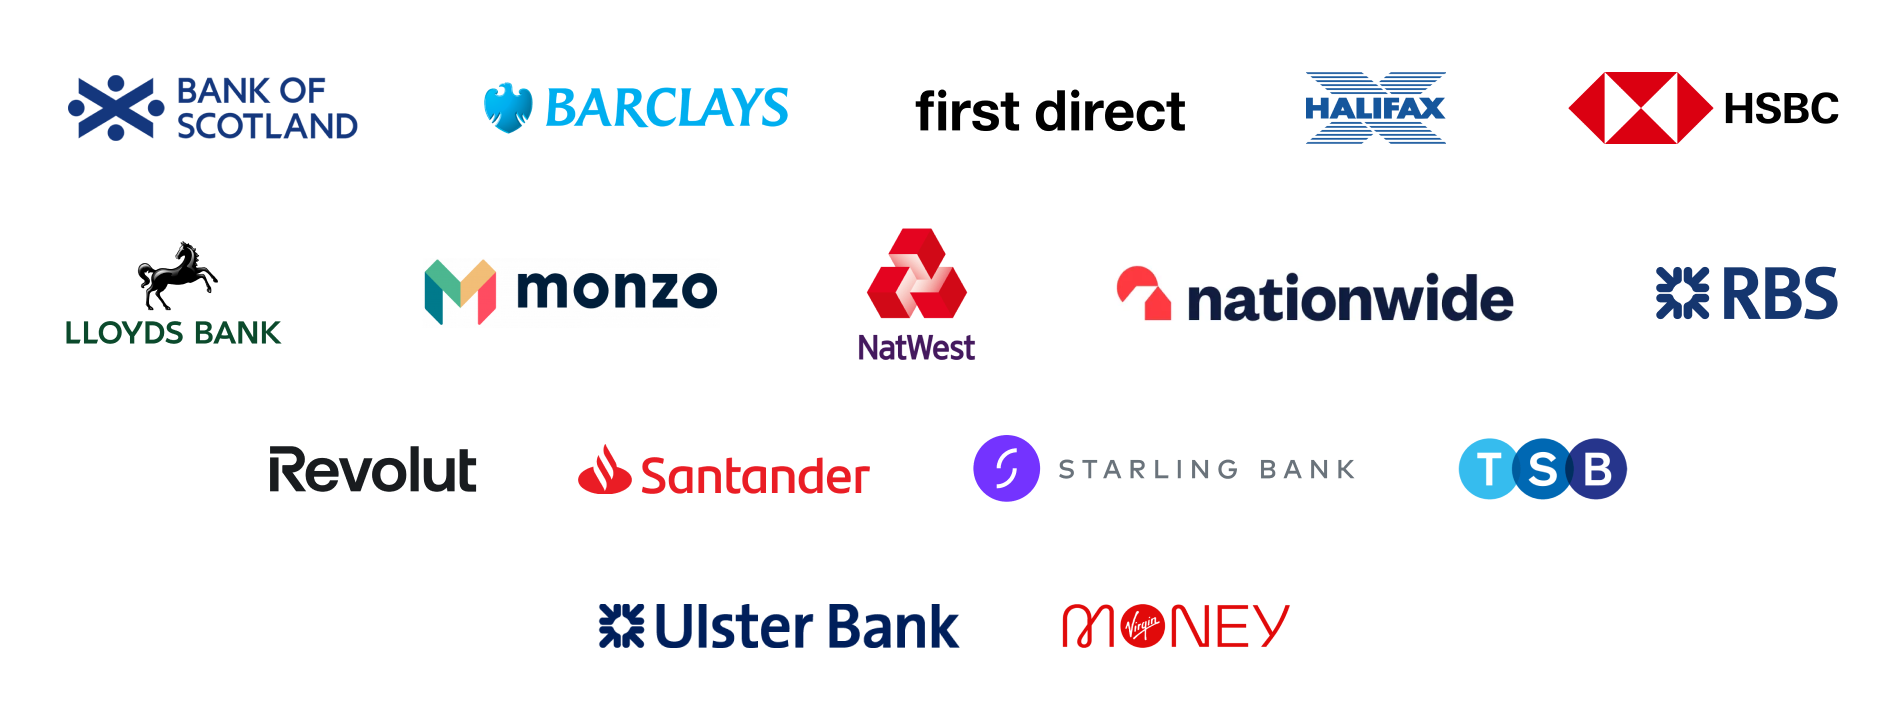 Our connected banks